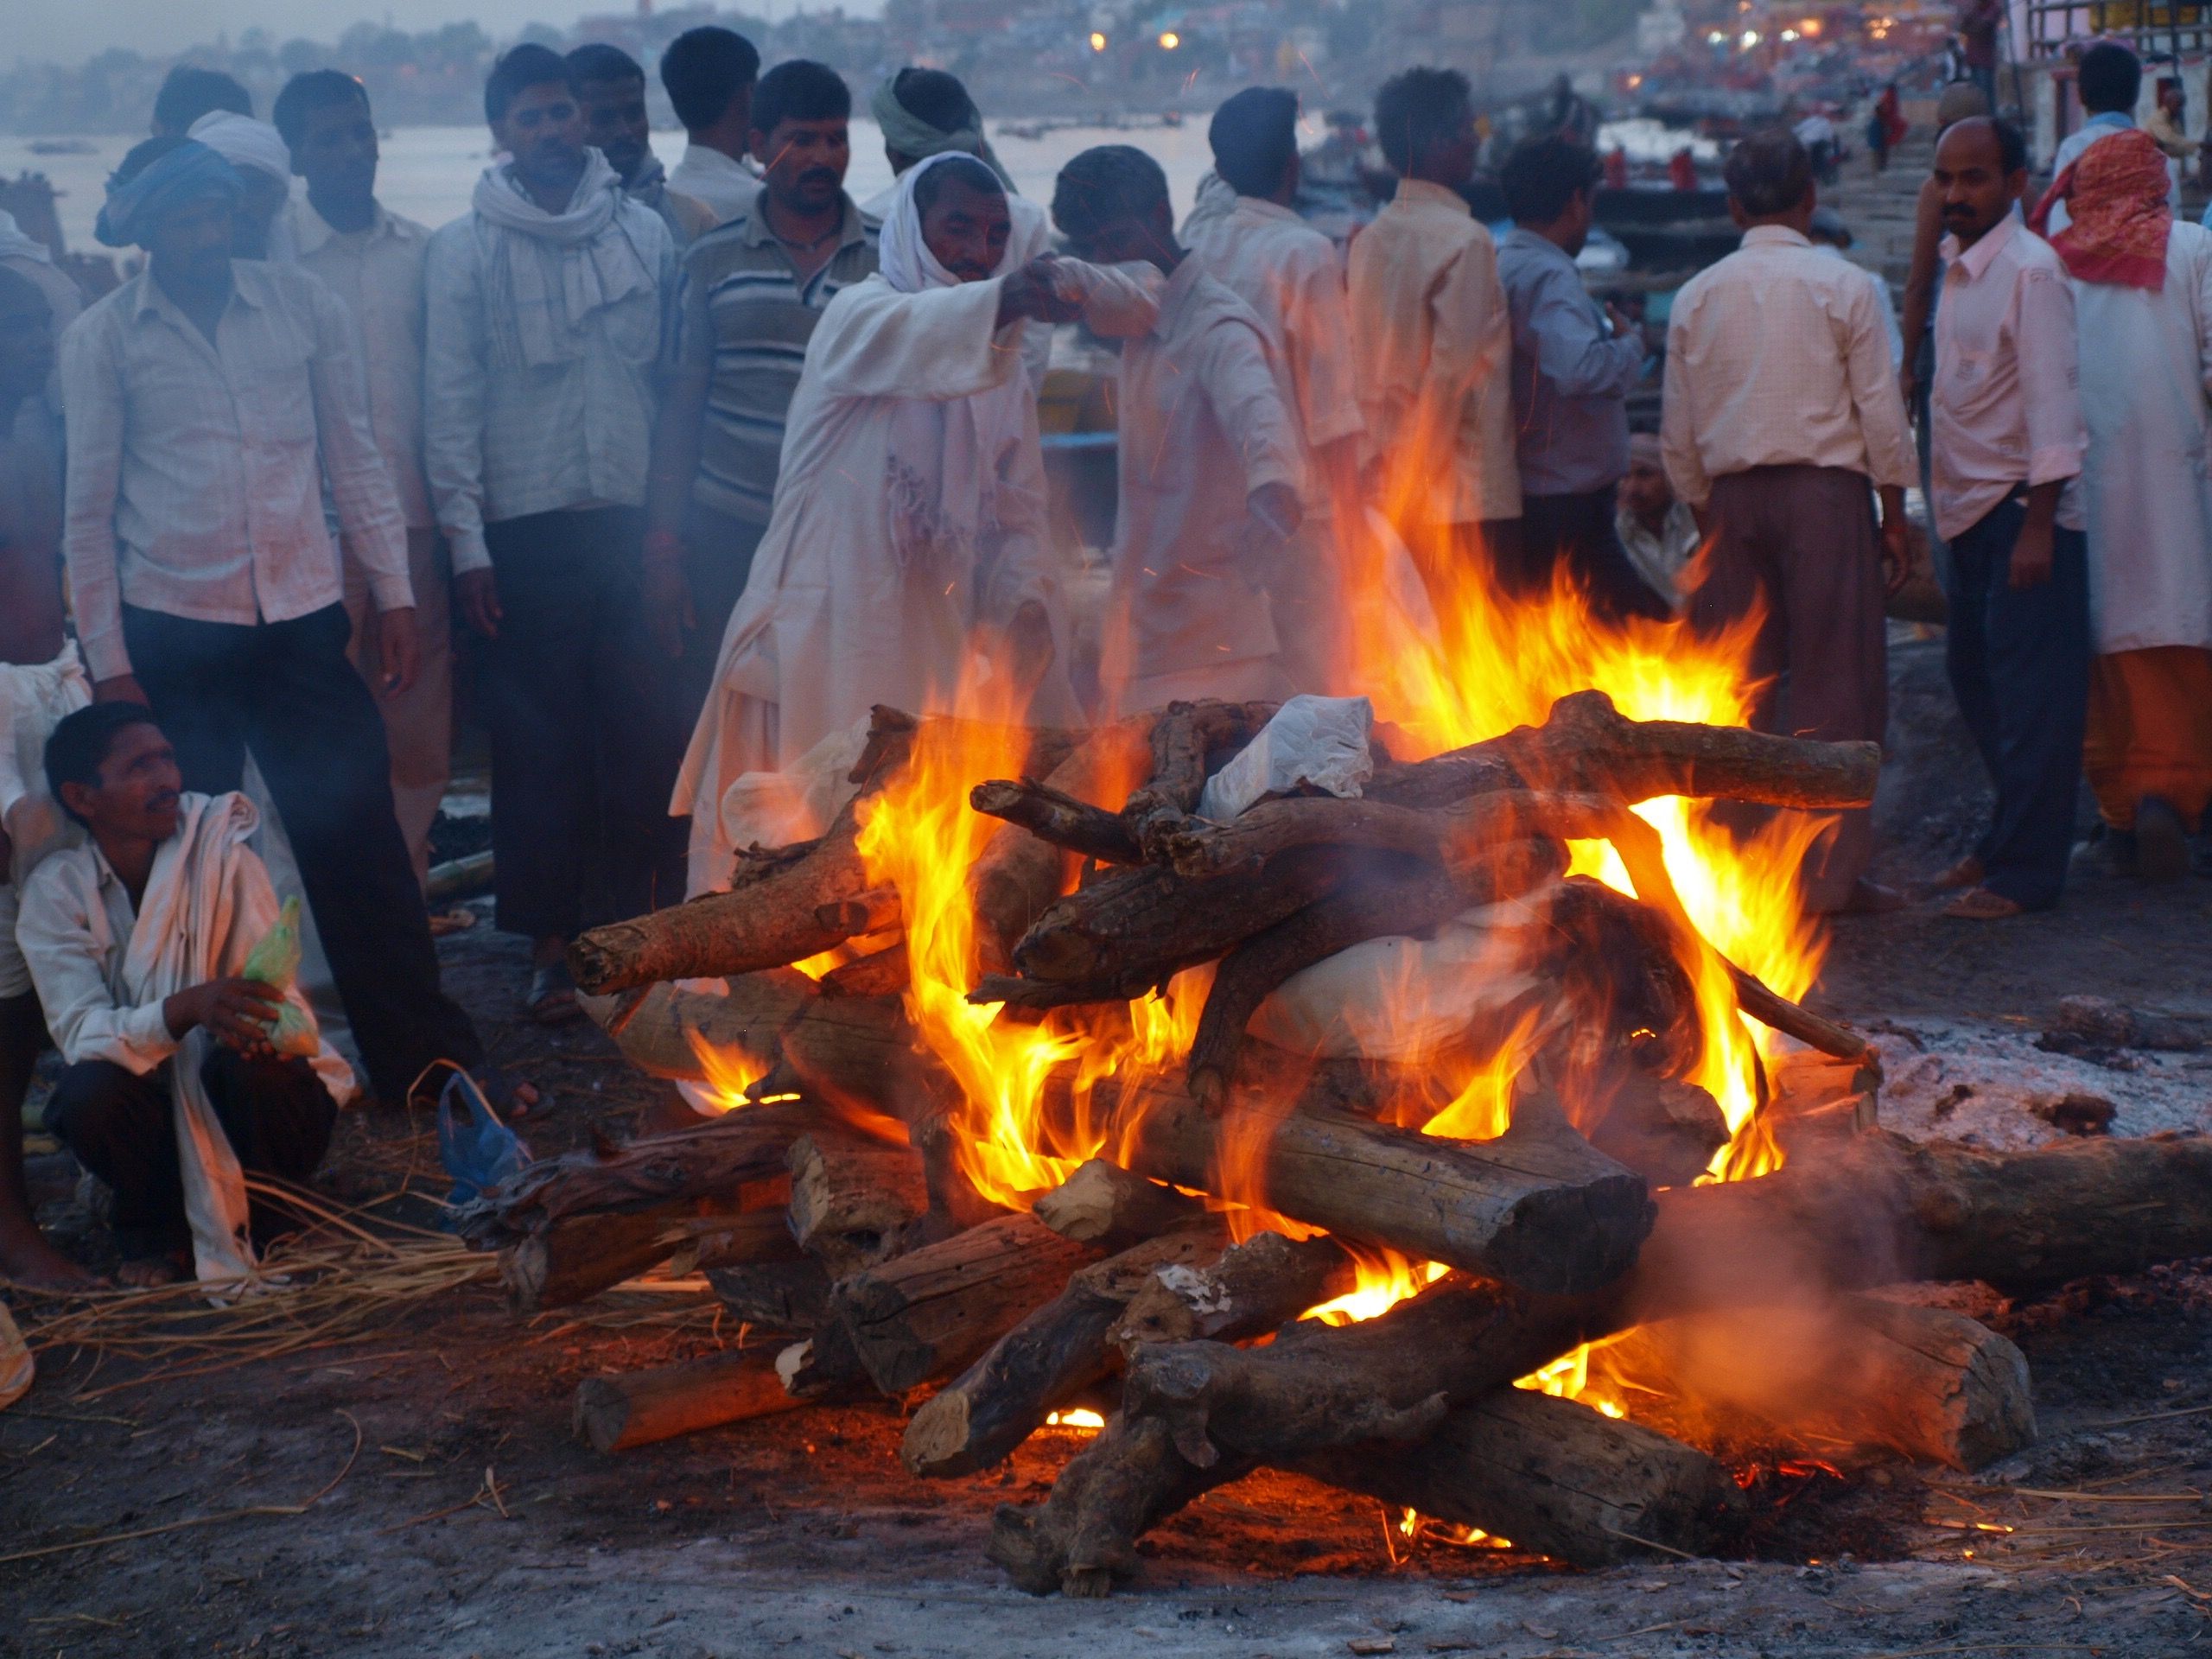 Hindus believe that cremation in Varanasi frees them from the cycle of birth, death, and reincarnation. Image by George Black. India, 2016.